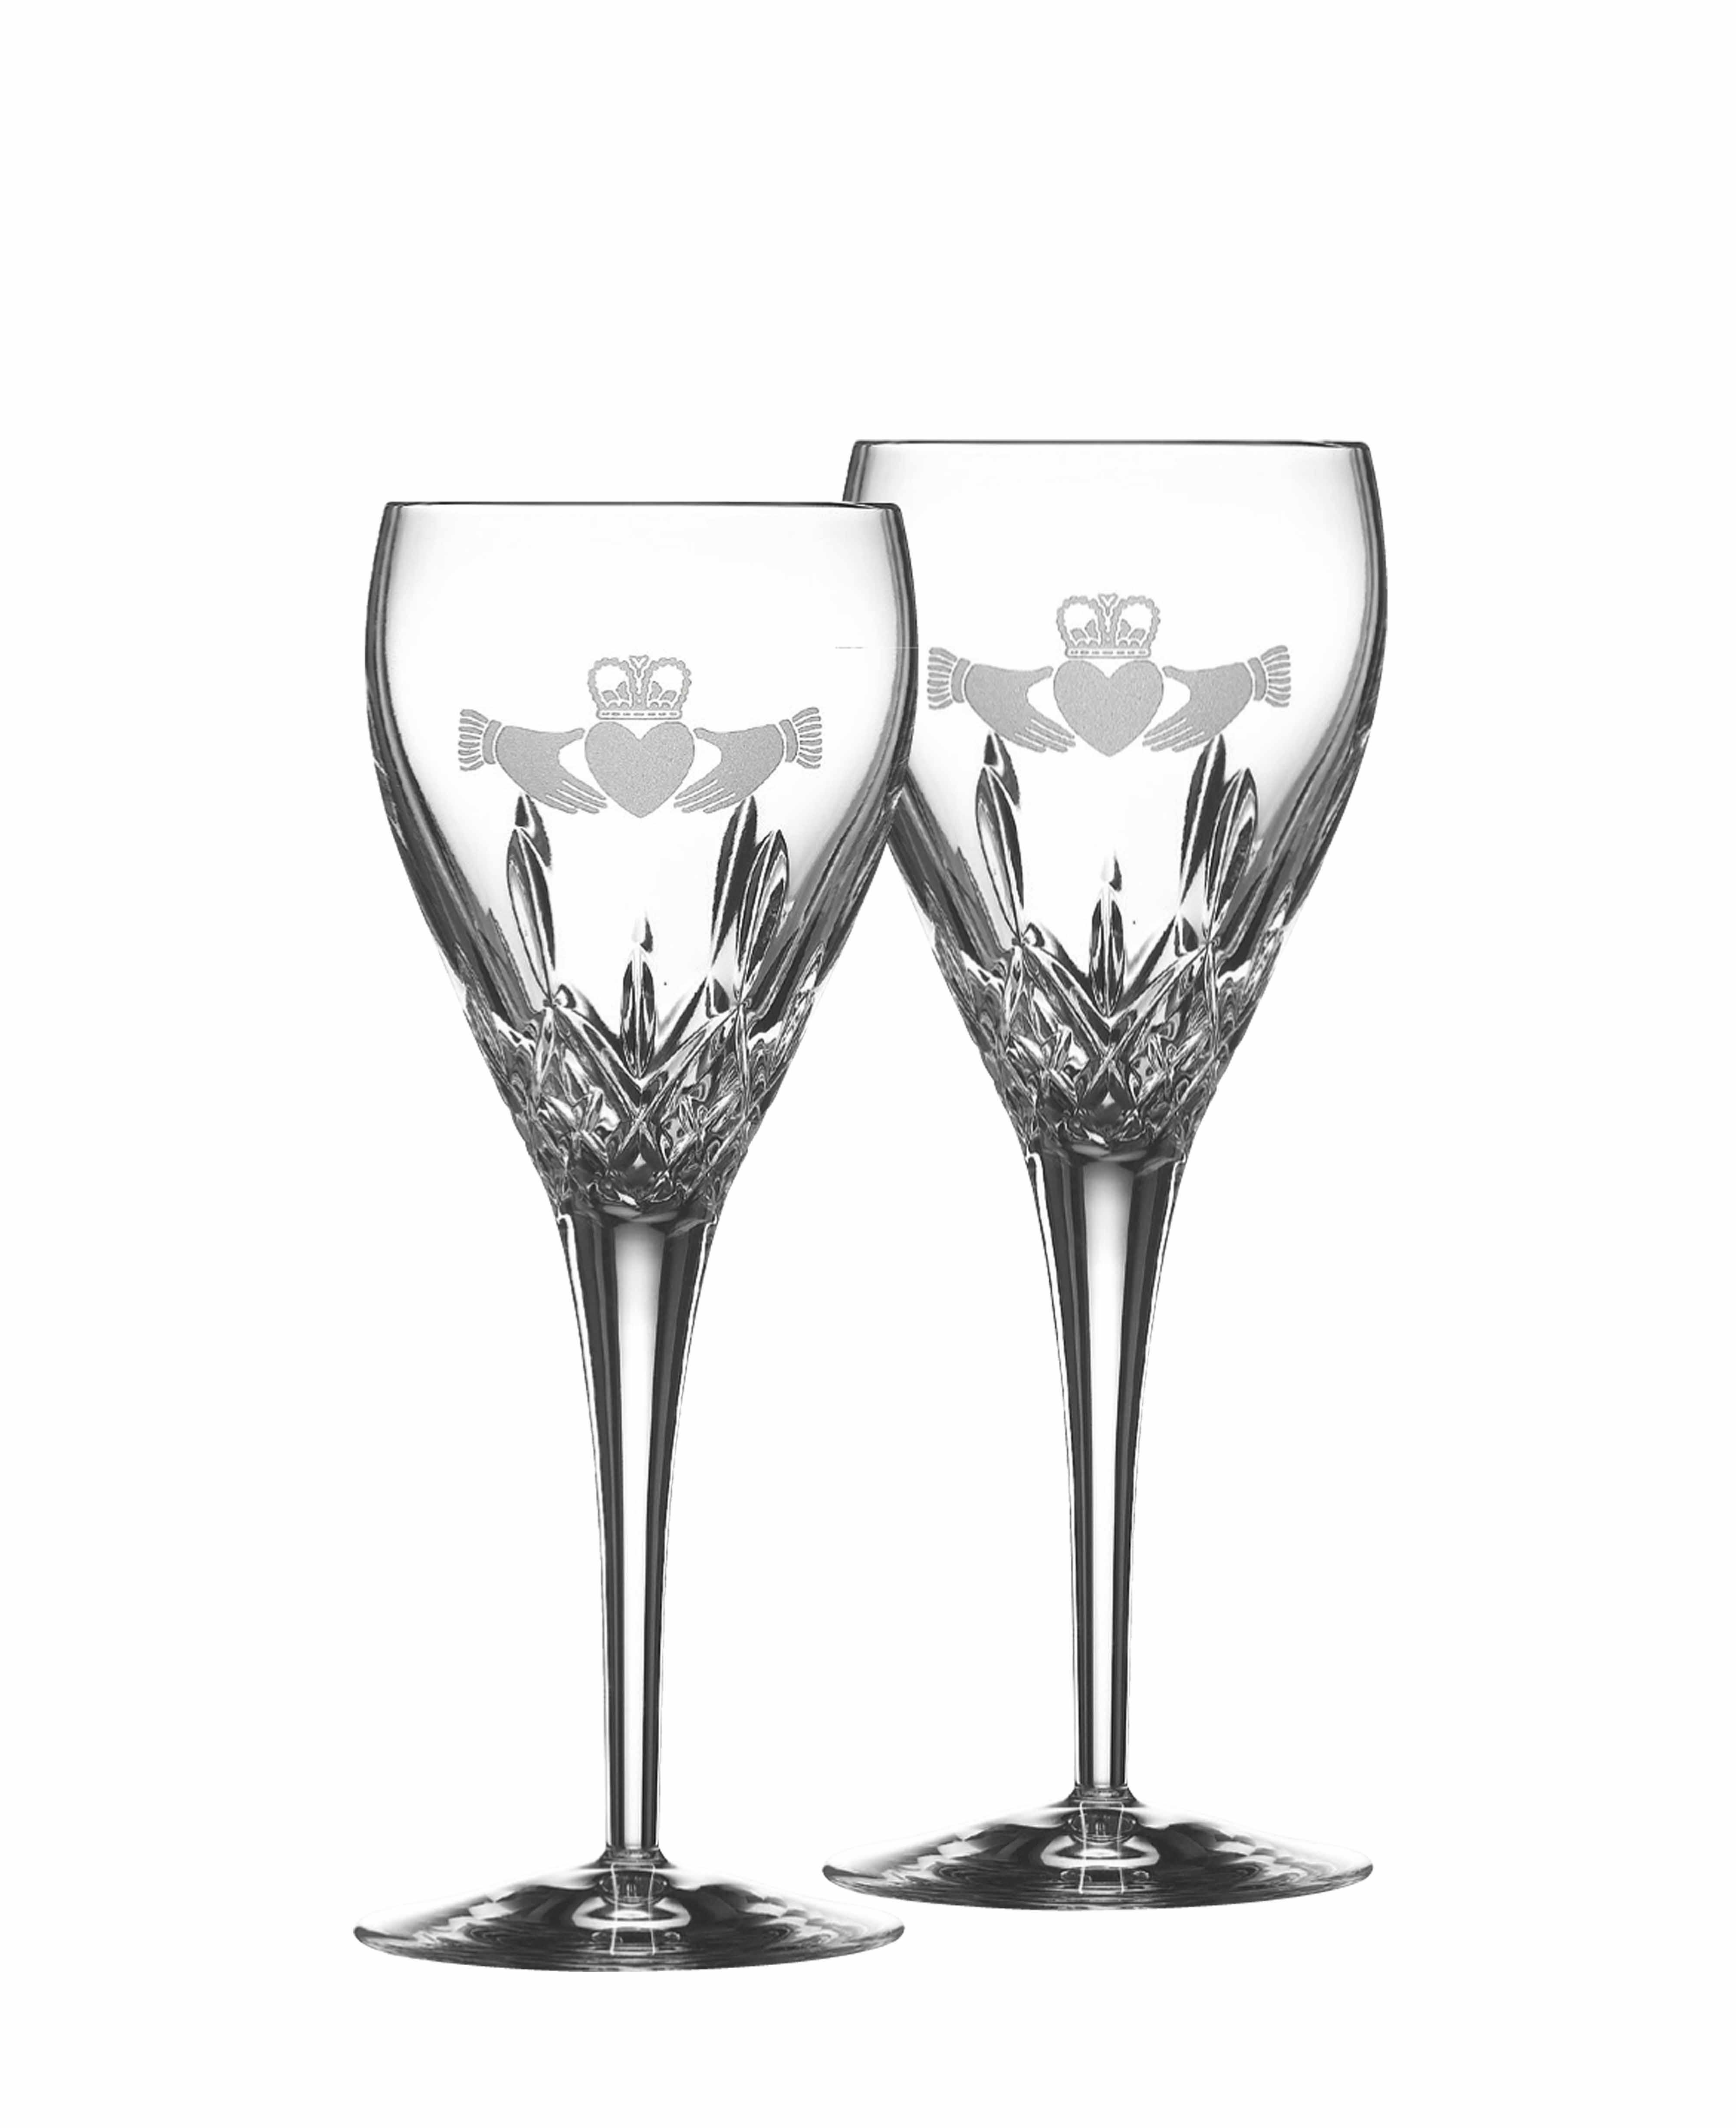 Product image for Galway Irish Crystal | Claddagh White Wine (Pair)